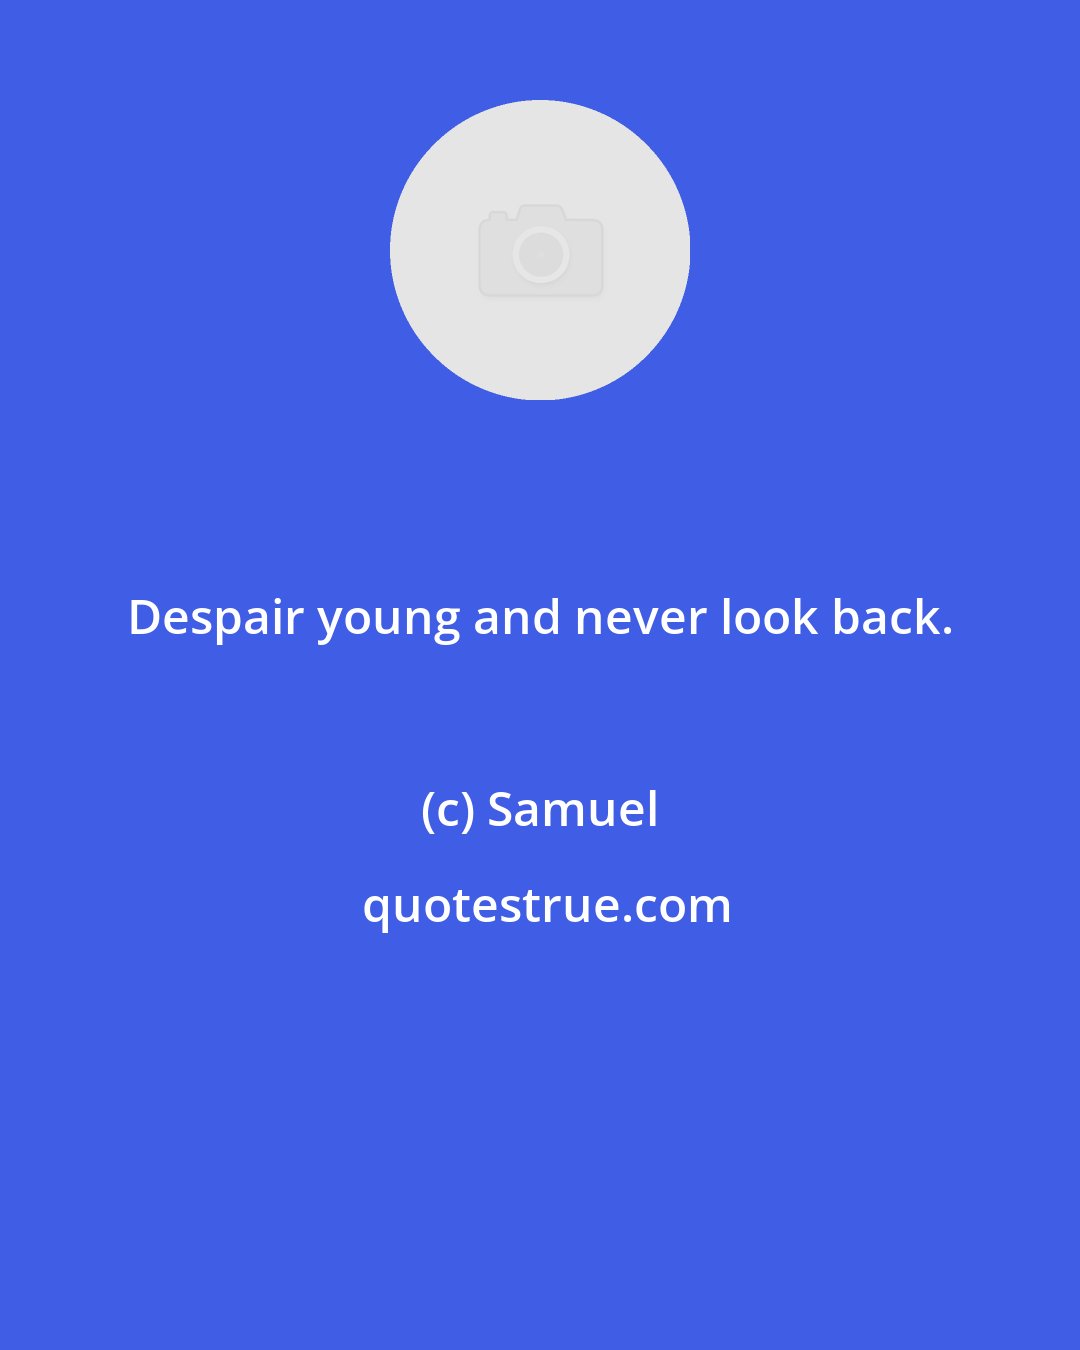 Samuel: Despair young and never look back.